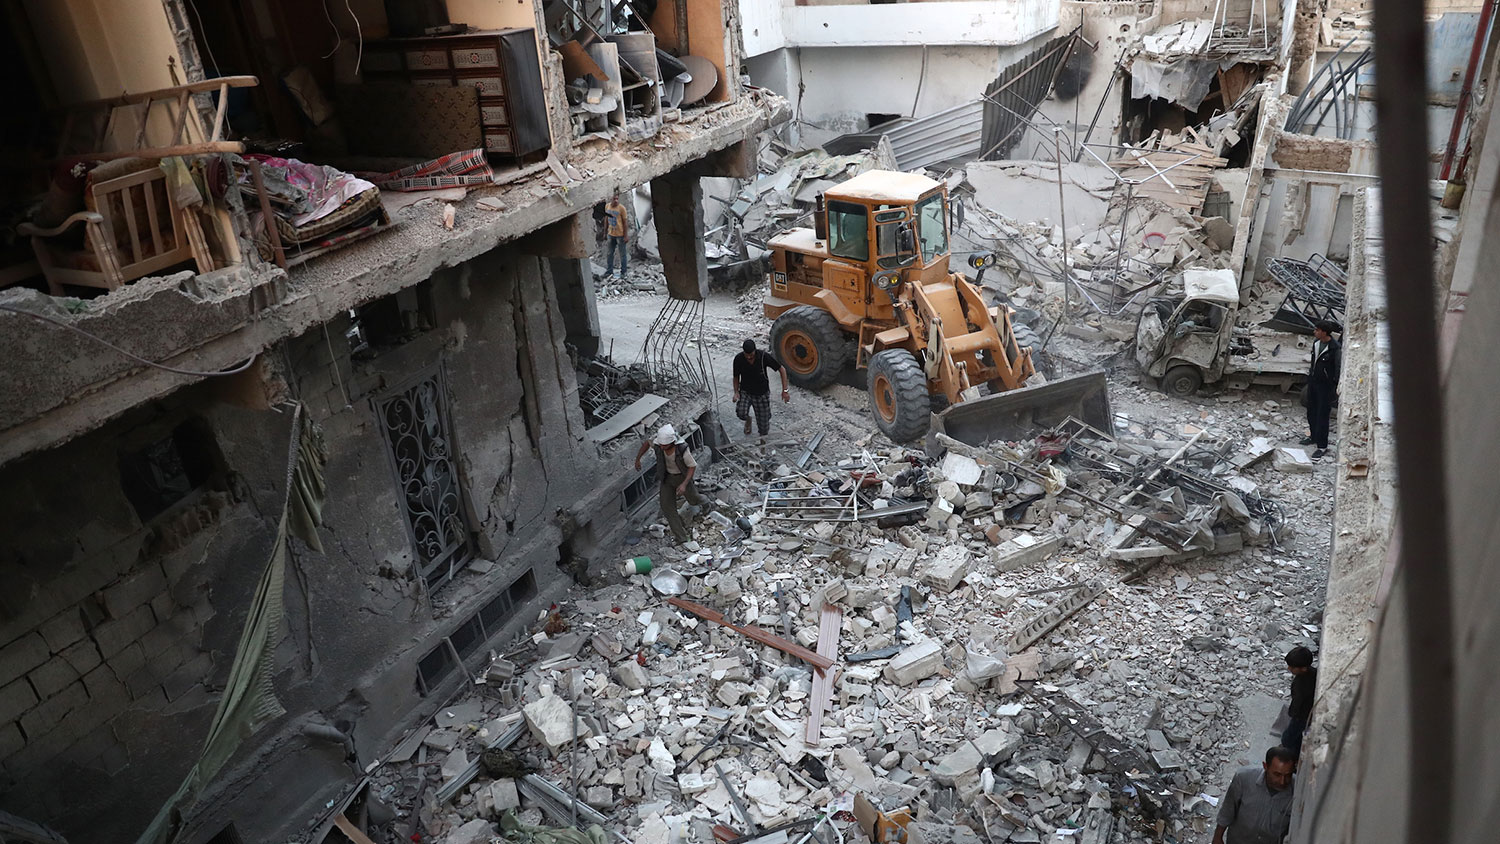 A digger removes the rubble of destroyed buildings on Oct. 3, 2016, following reported air strikes in the rebel-held town of Douma, on the eastern outskirts of the capital Damascus.
